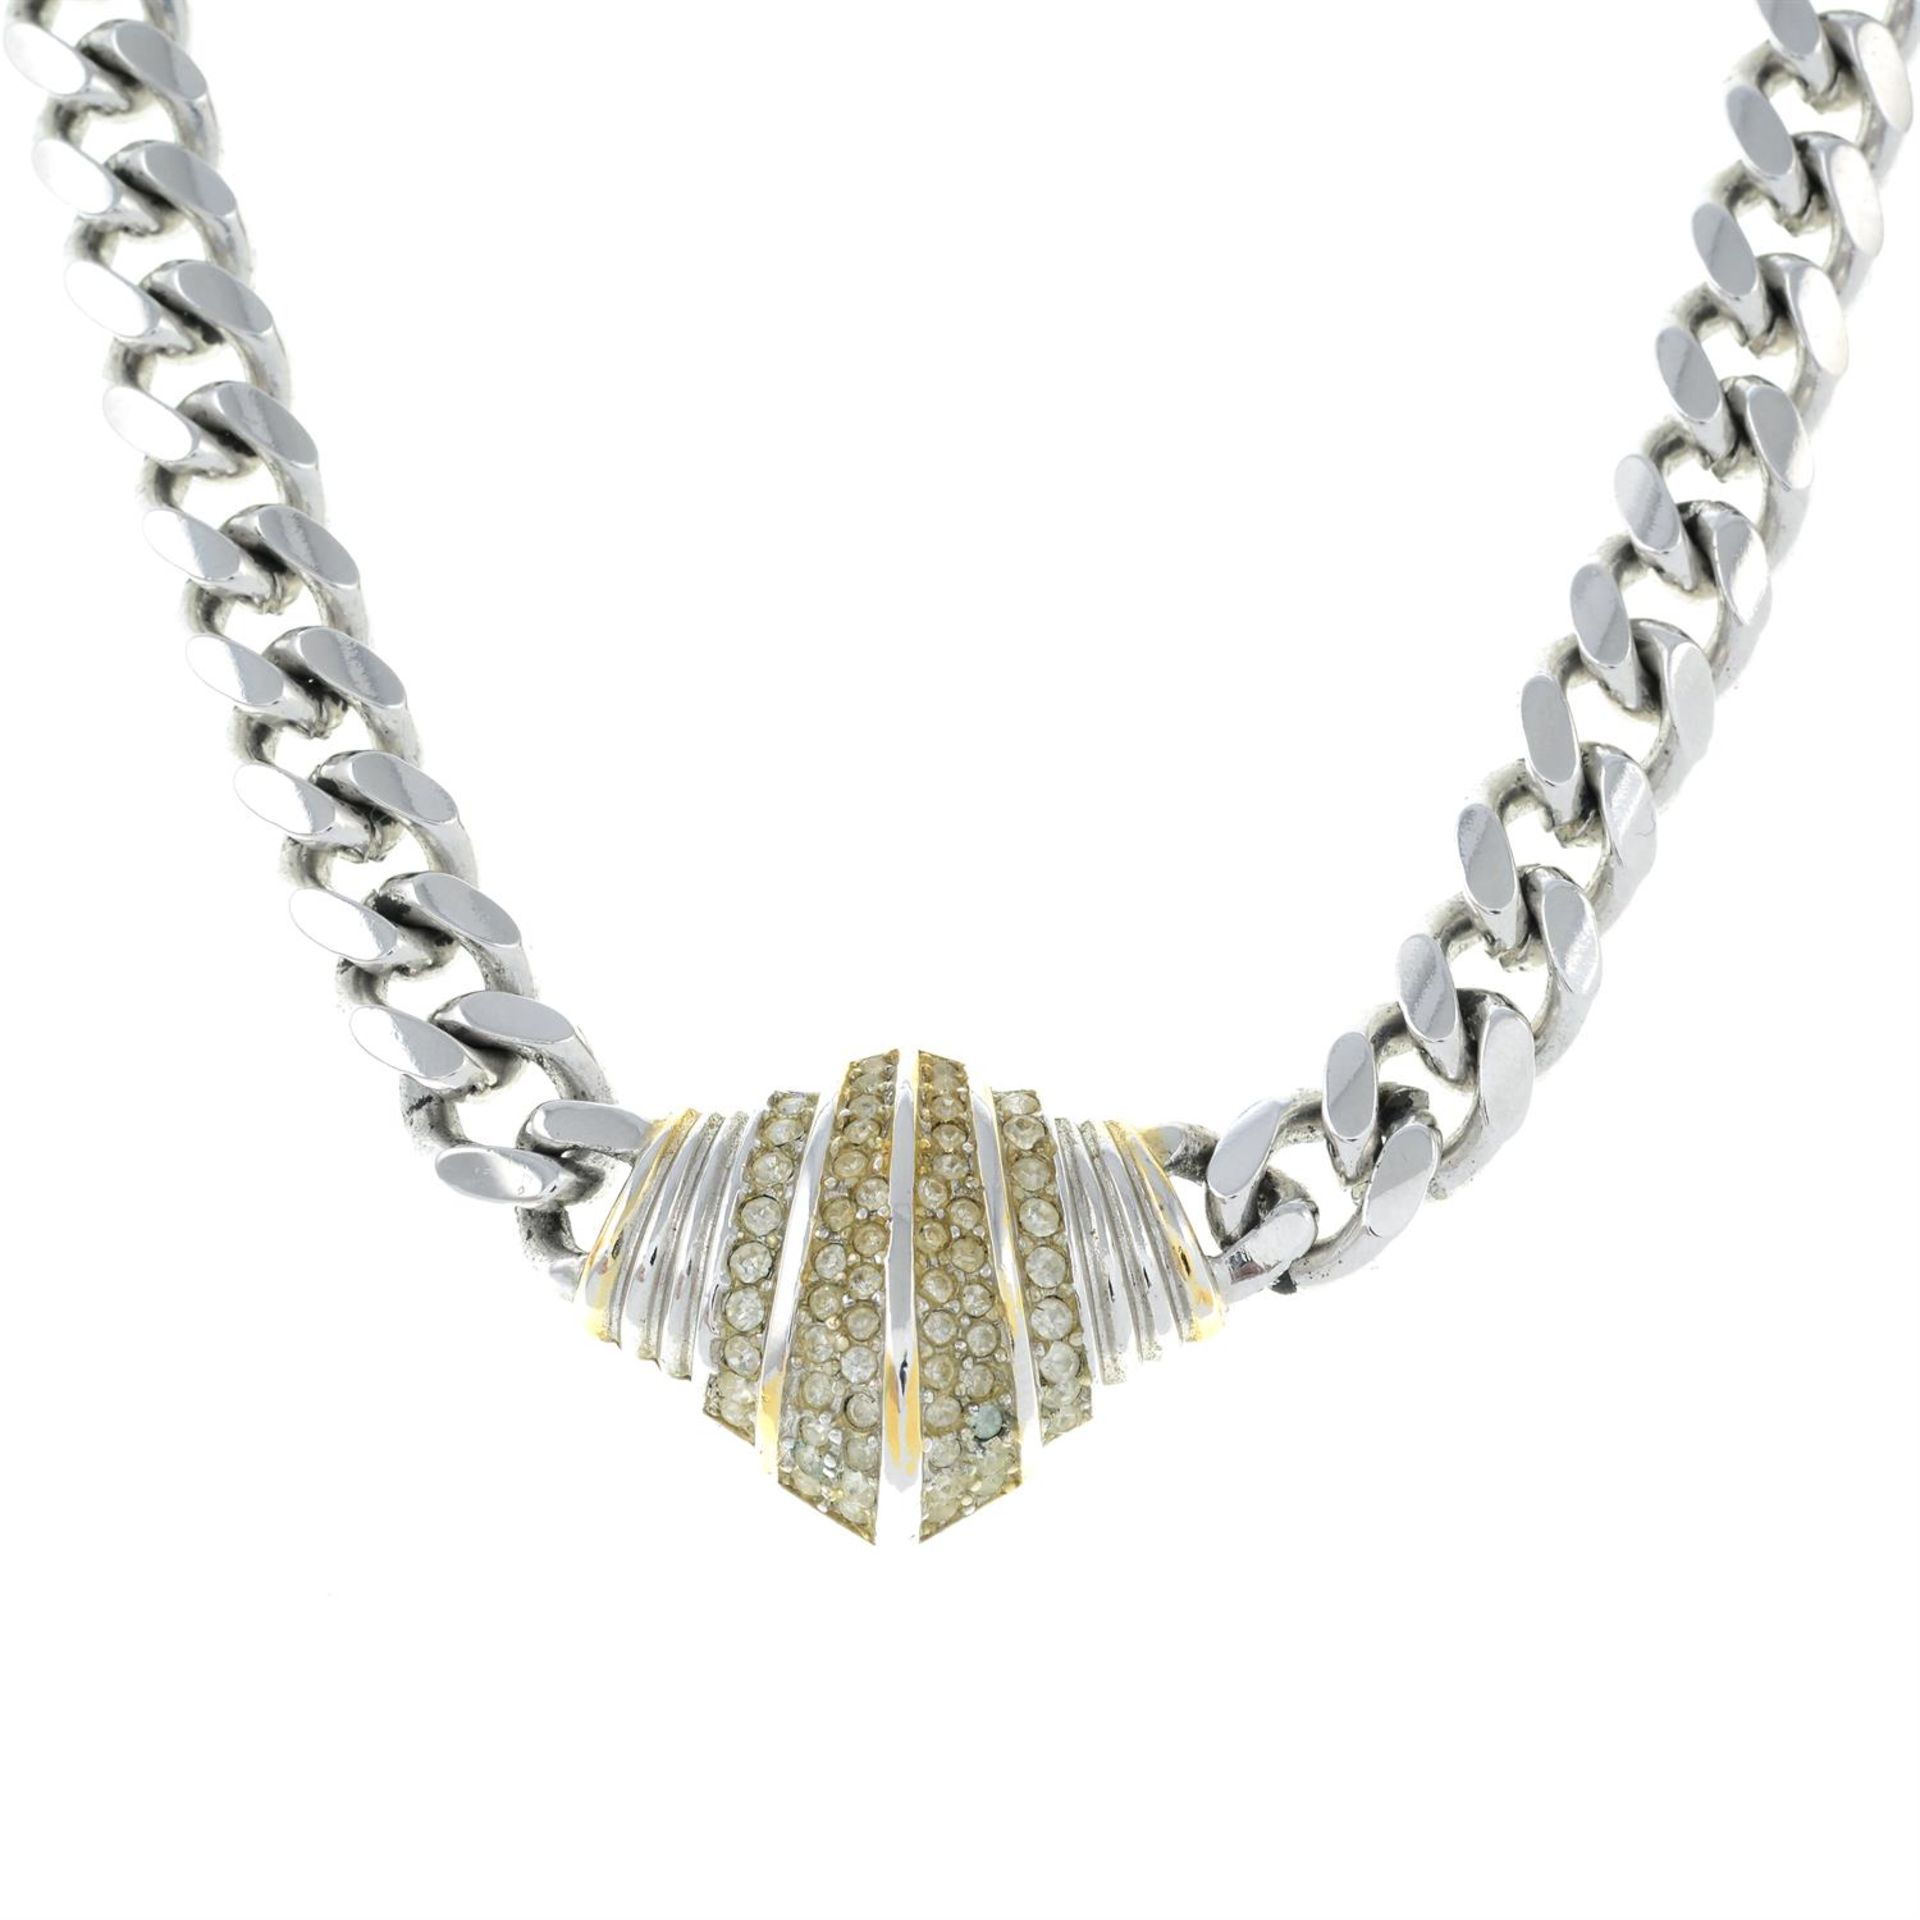 CHRISTIAN DIOR - a chain necklace with integral clear paste pendant.